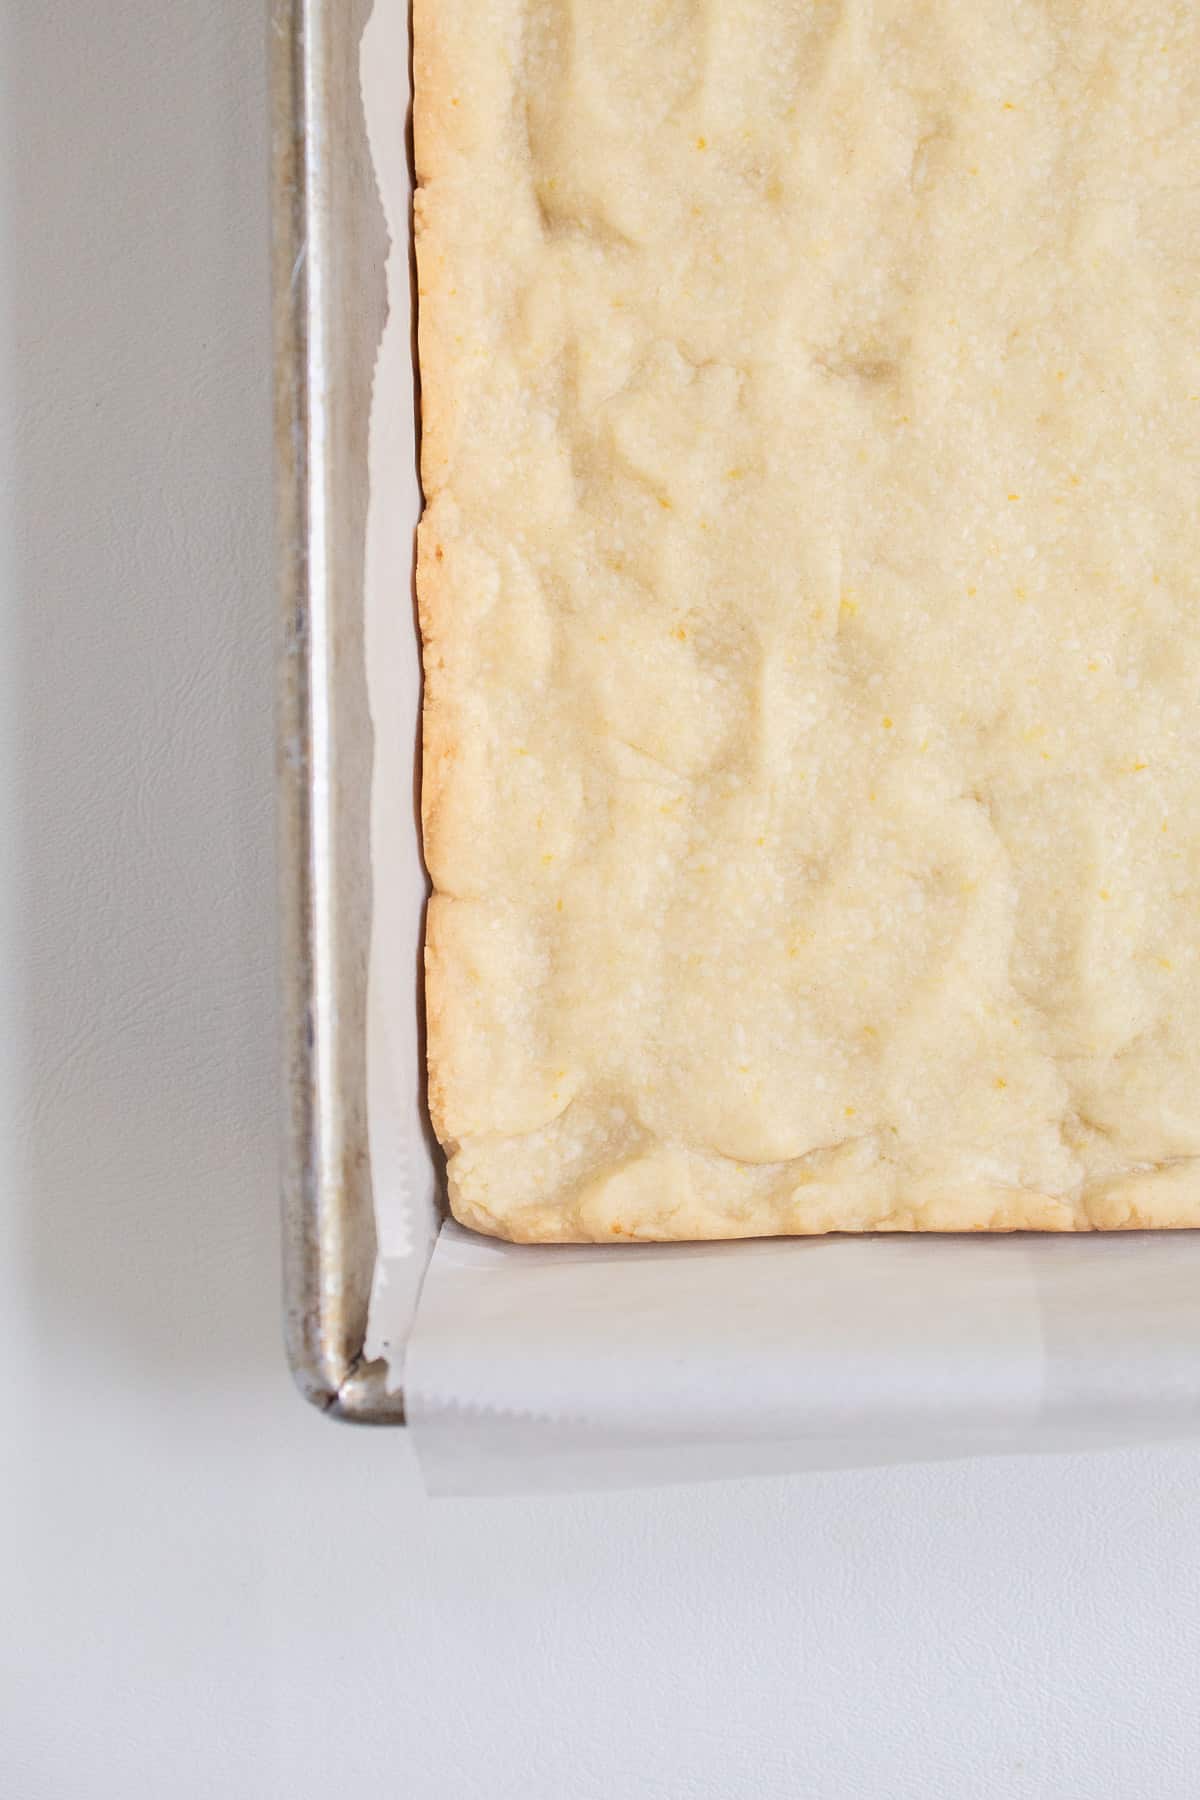 The light golden color at the edges of the parbaked shortbread crust.